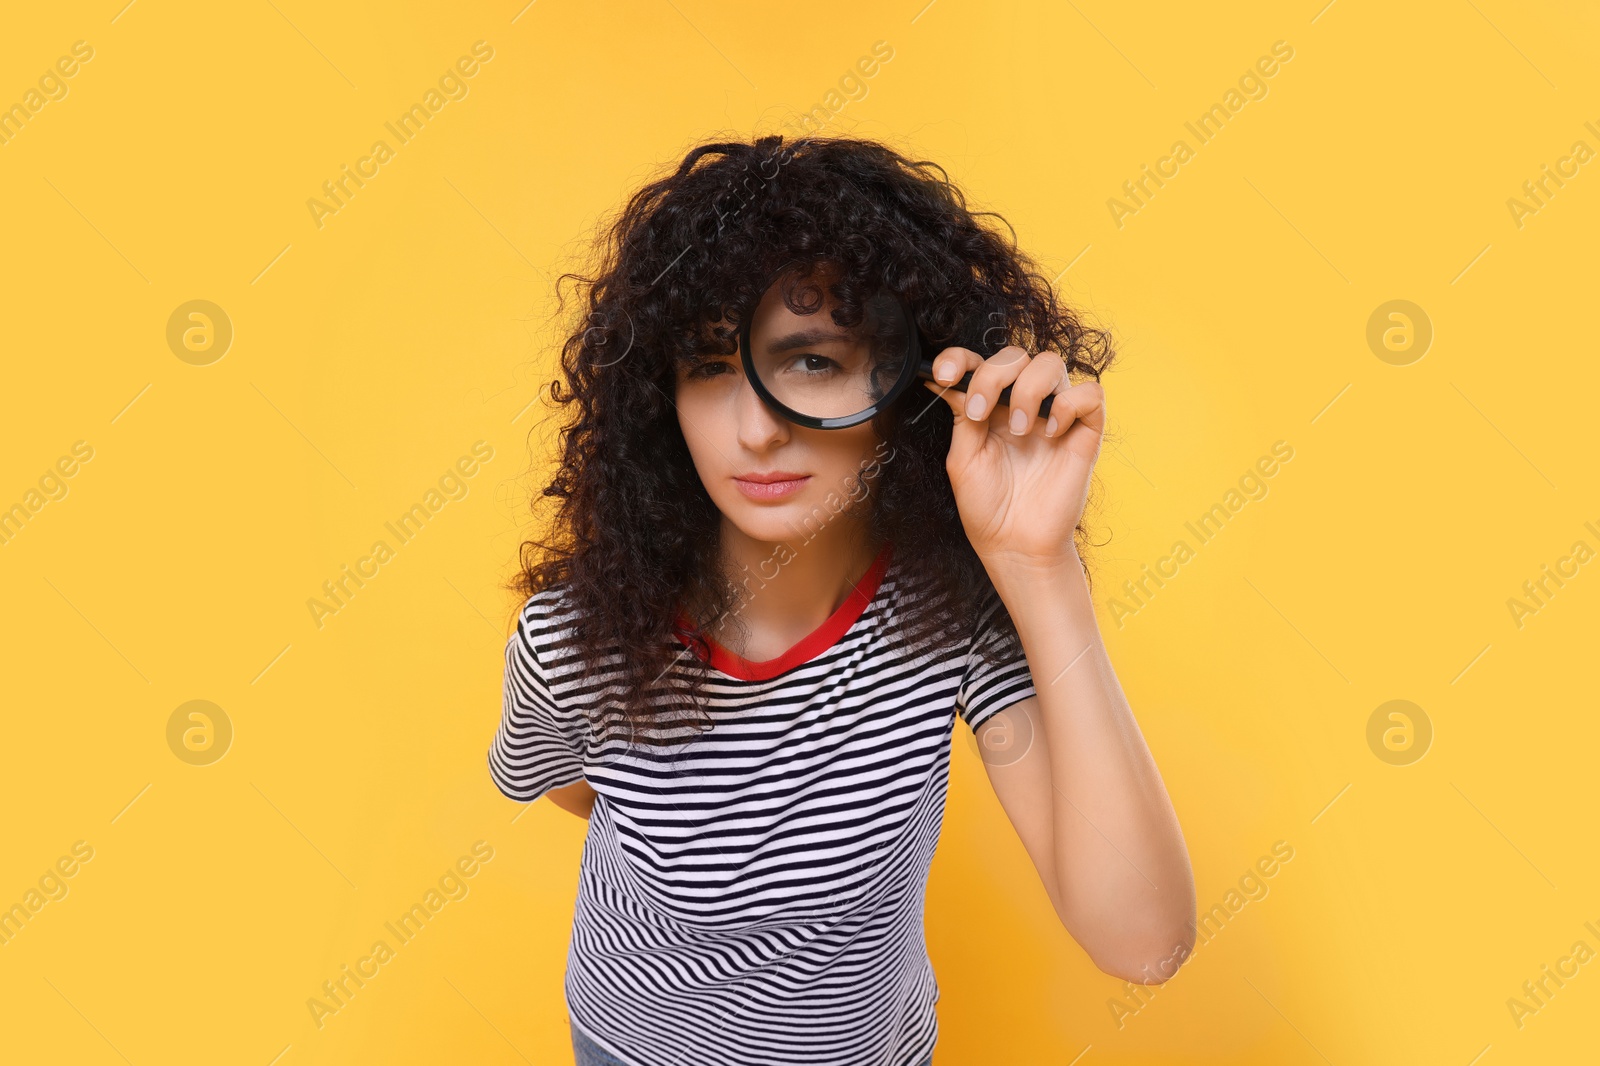 Photo of Curious young woman looking through magnifier glass on yellow background